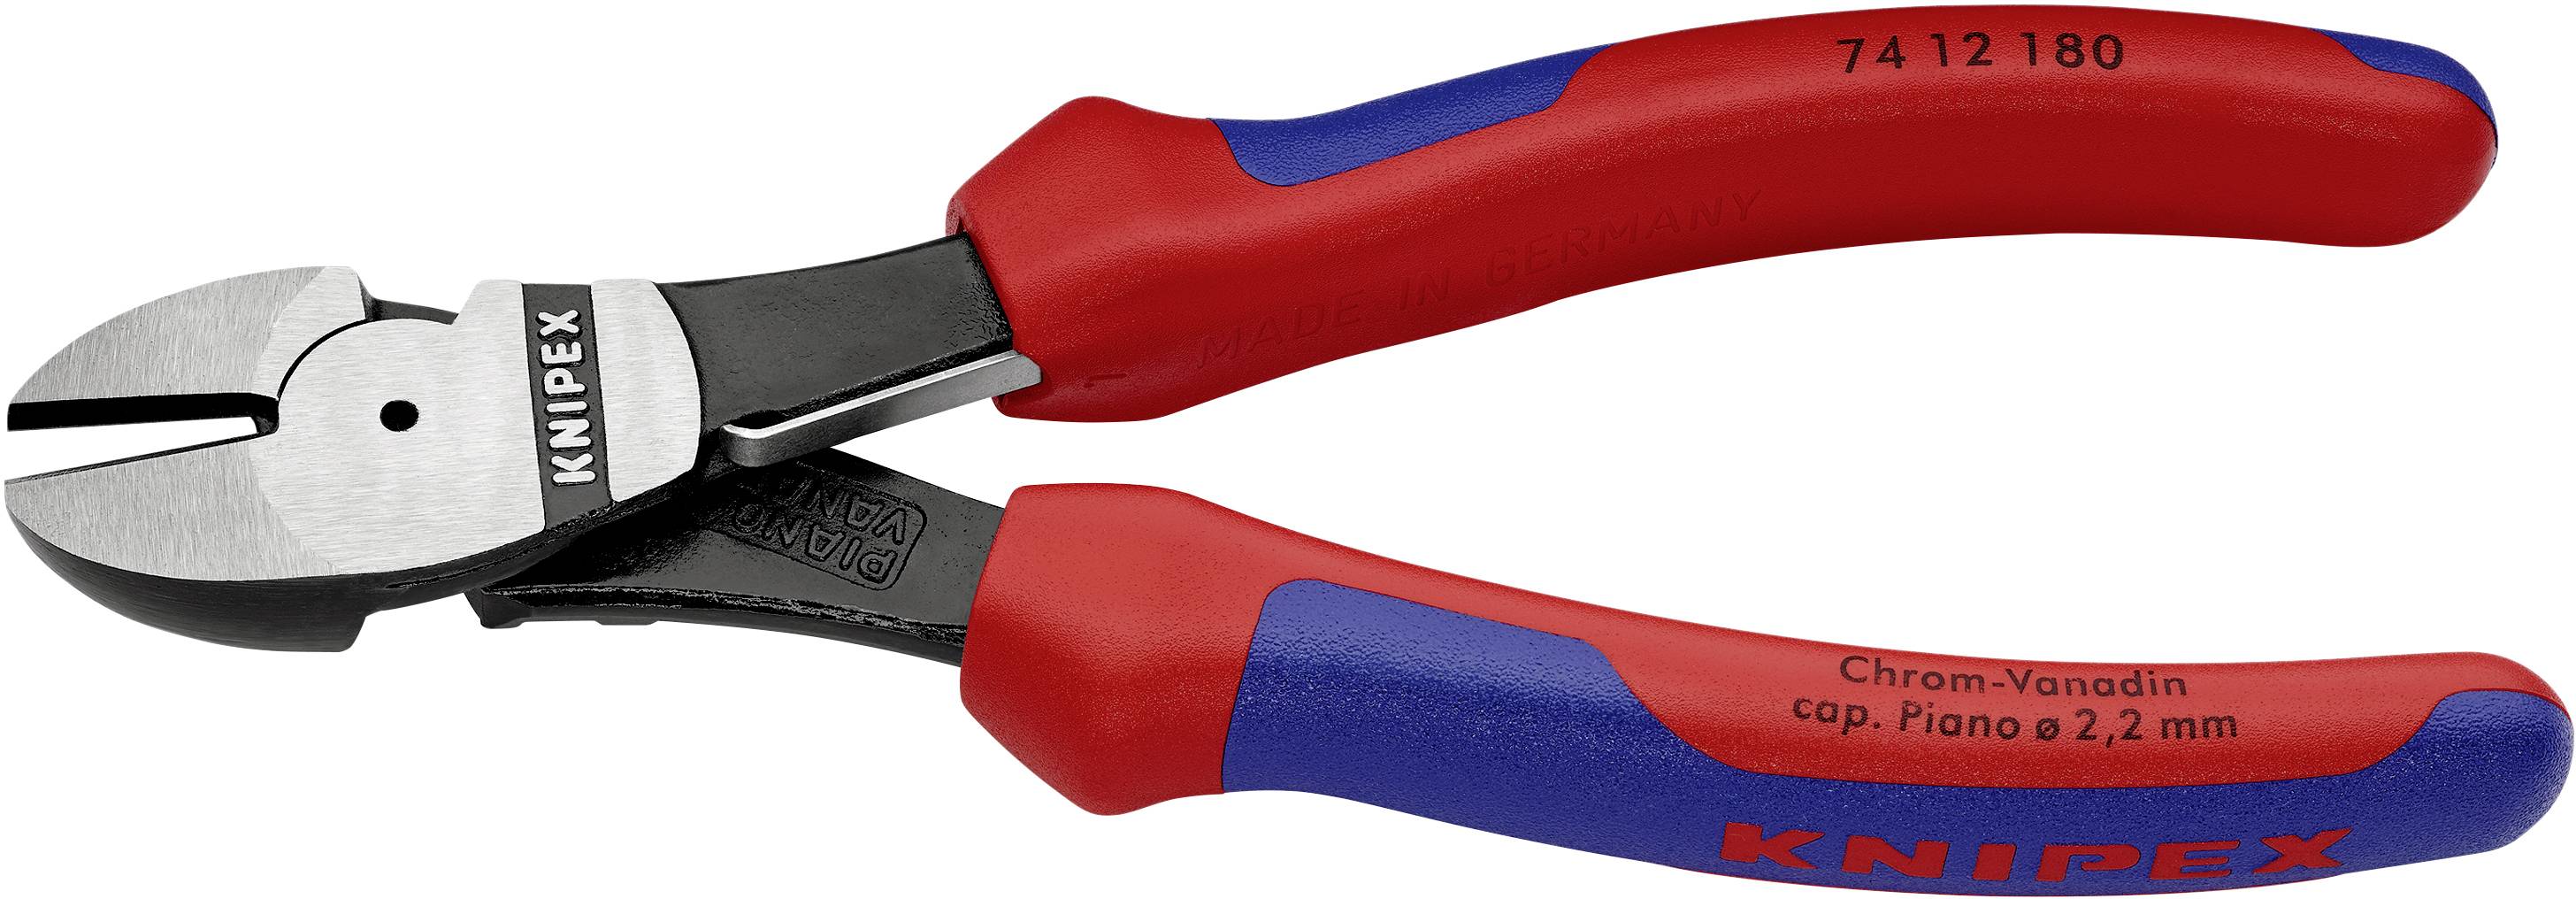 Knipex 180mm Fully Insulated S Range Diagonal Side Cutter 21455 